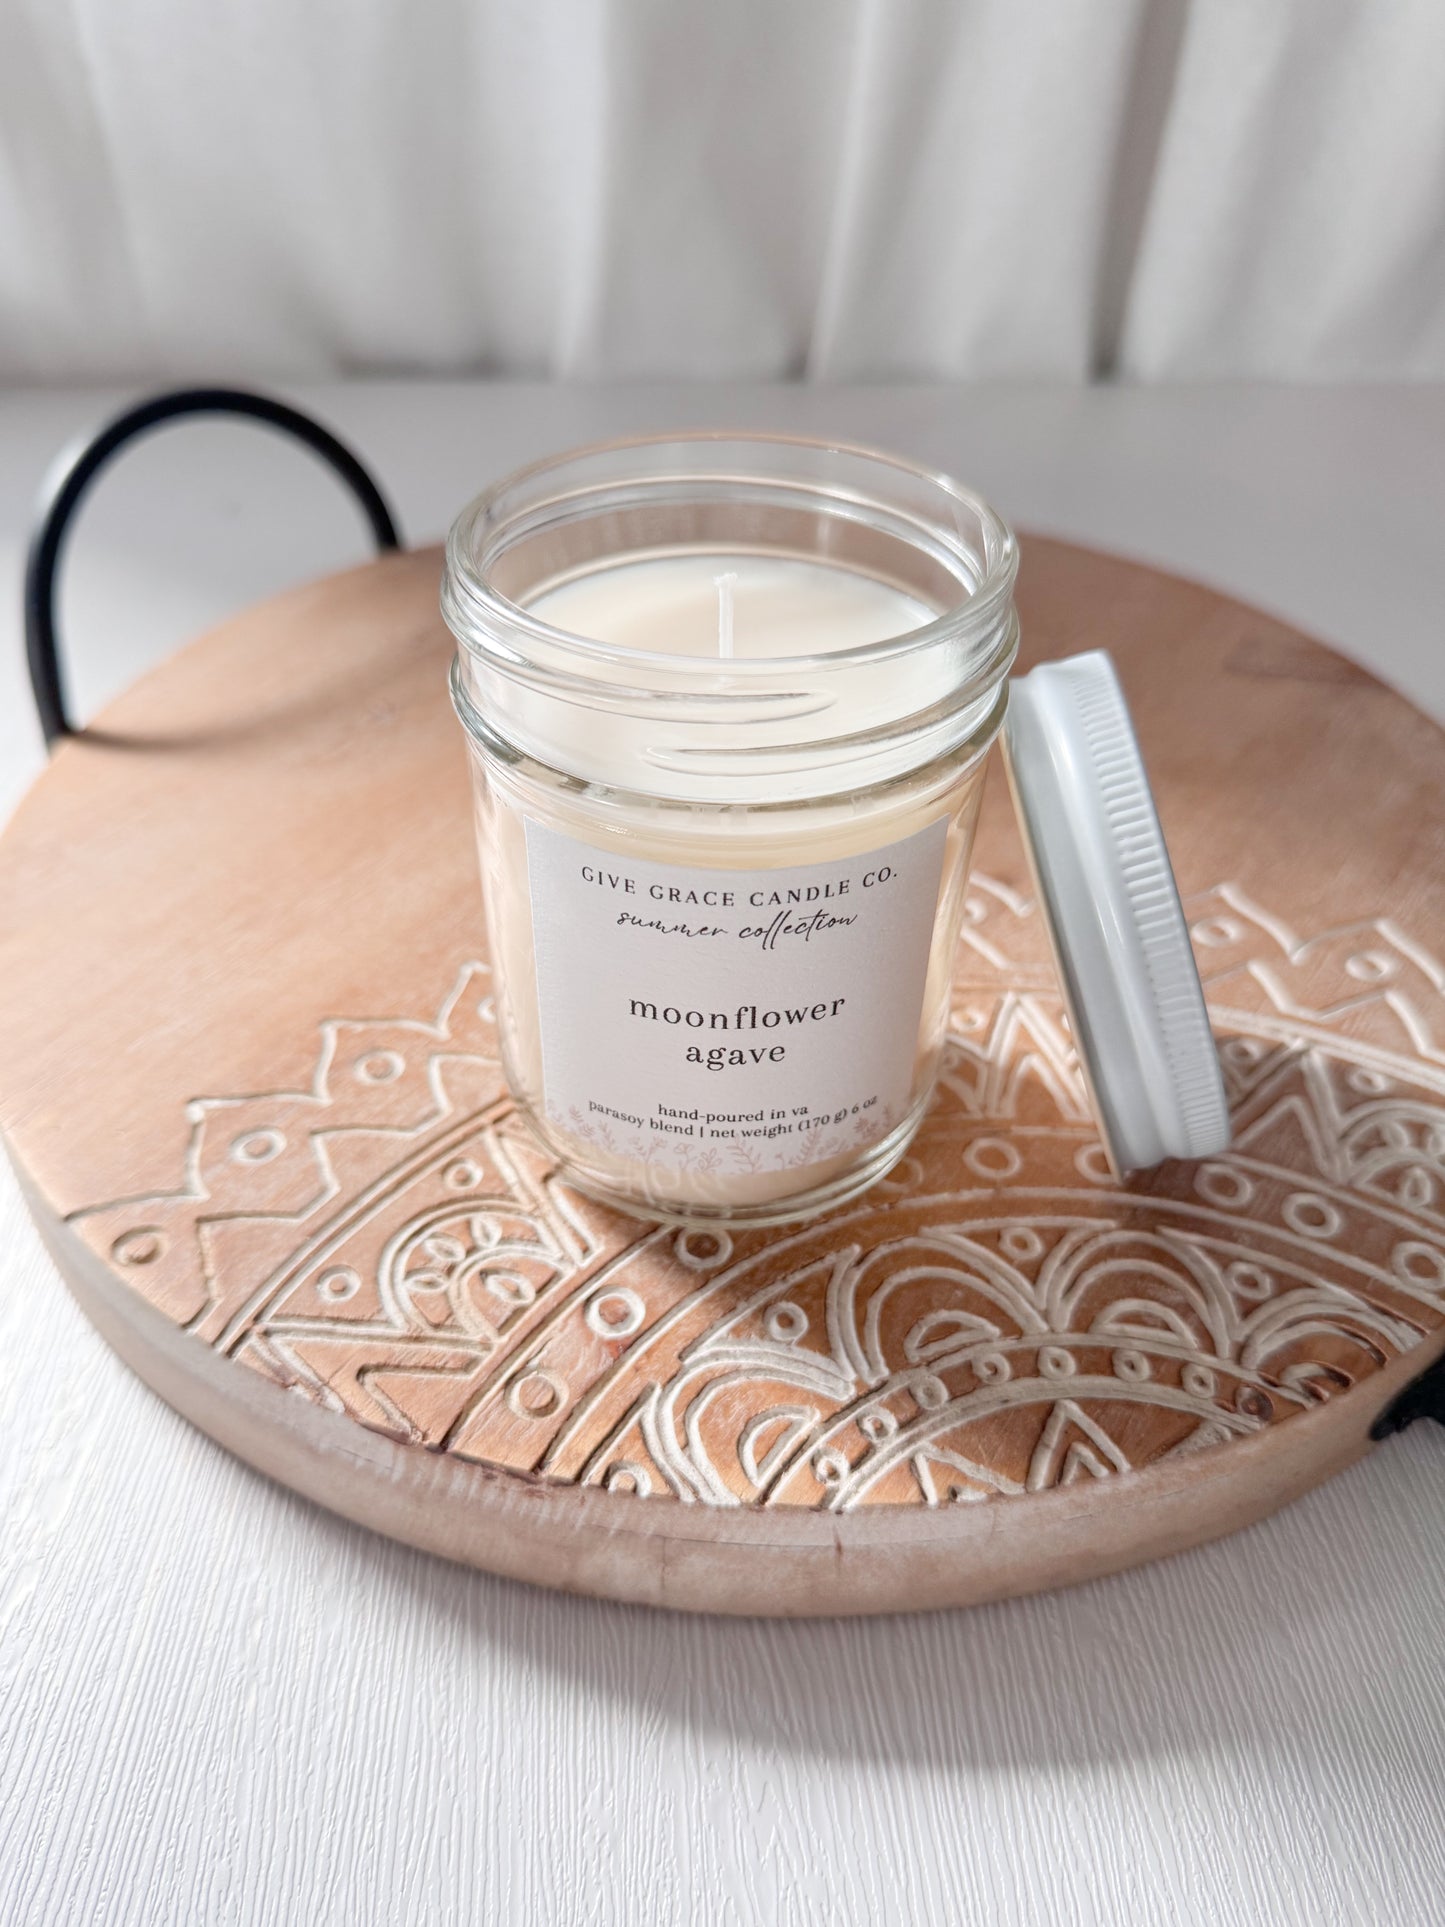 Moonflower Agave Candle